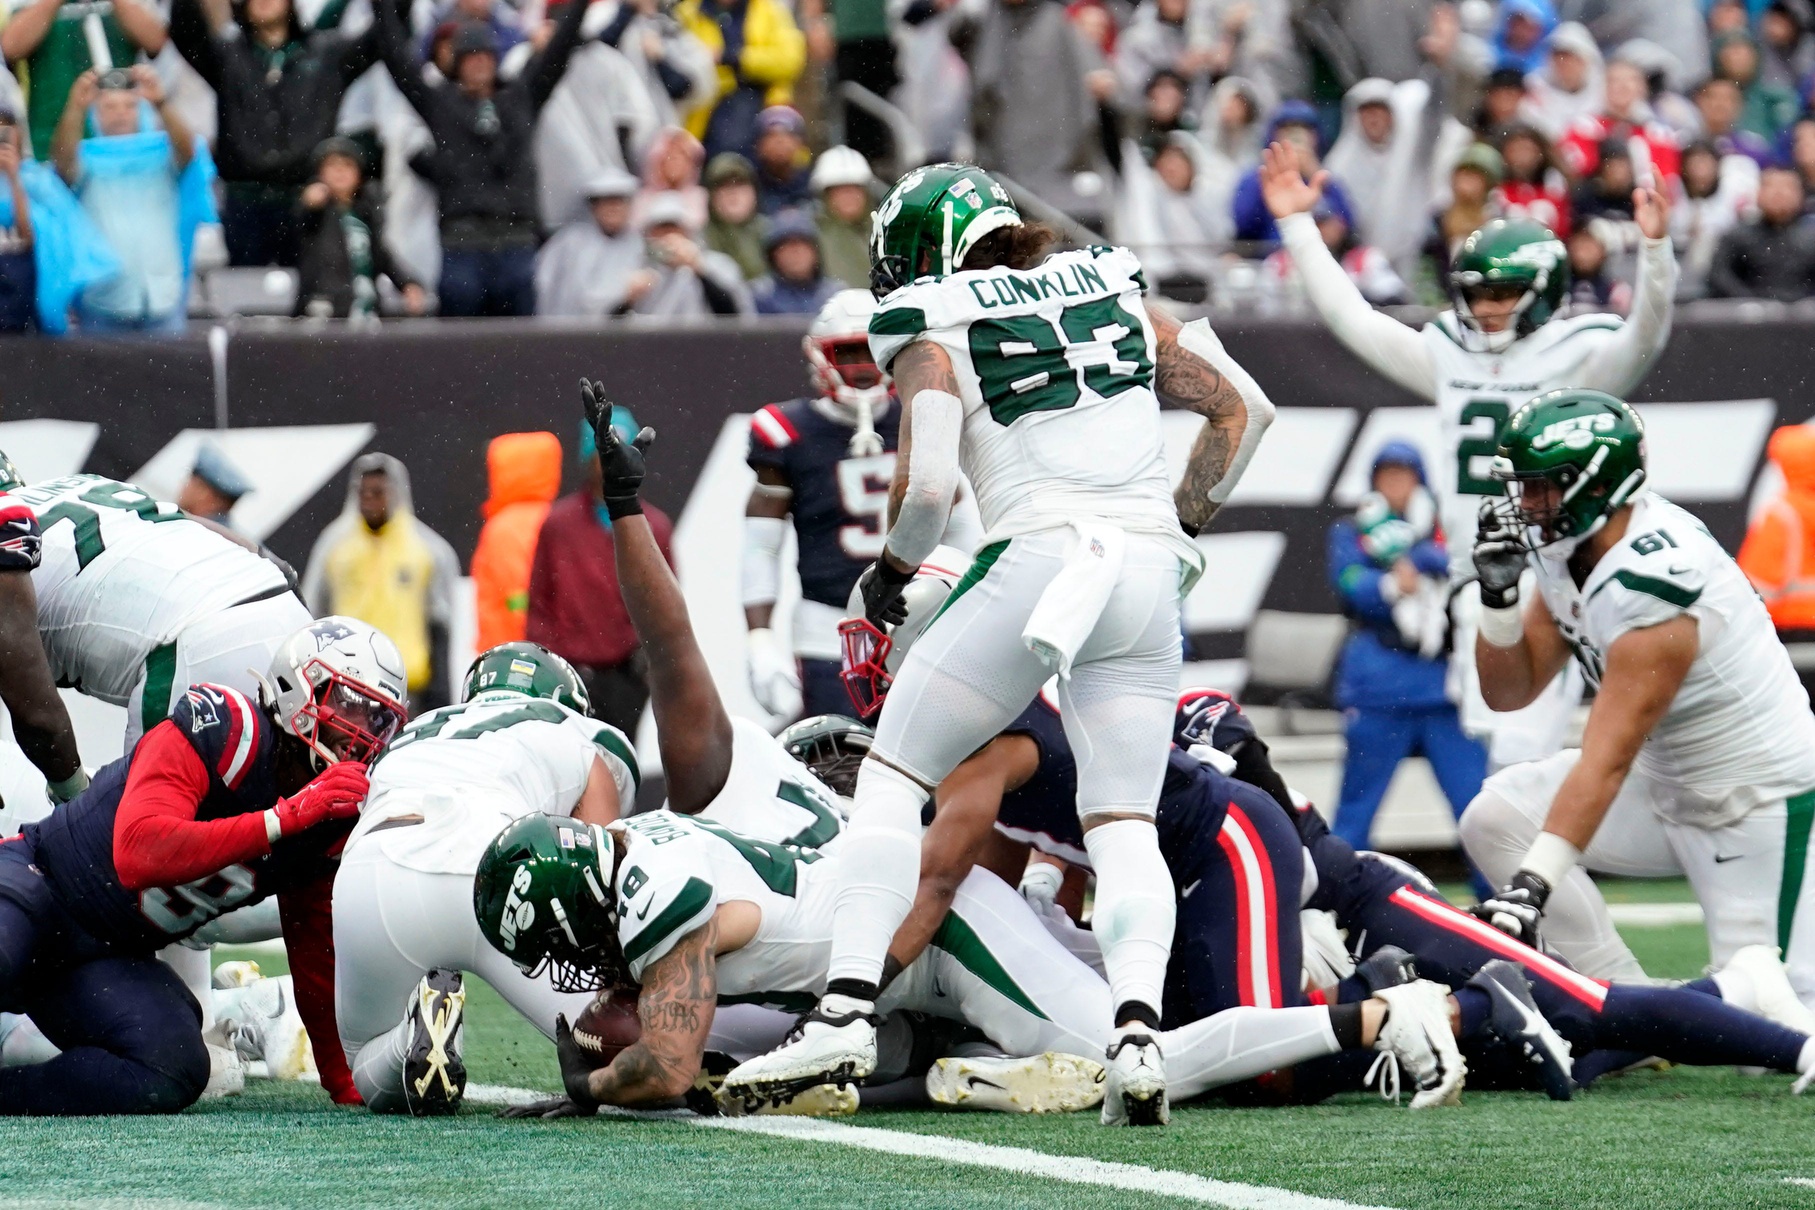 New York Jets Offensive Line leads Nick Bawden to a 1-yard Touchdown